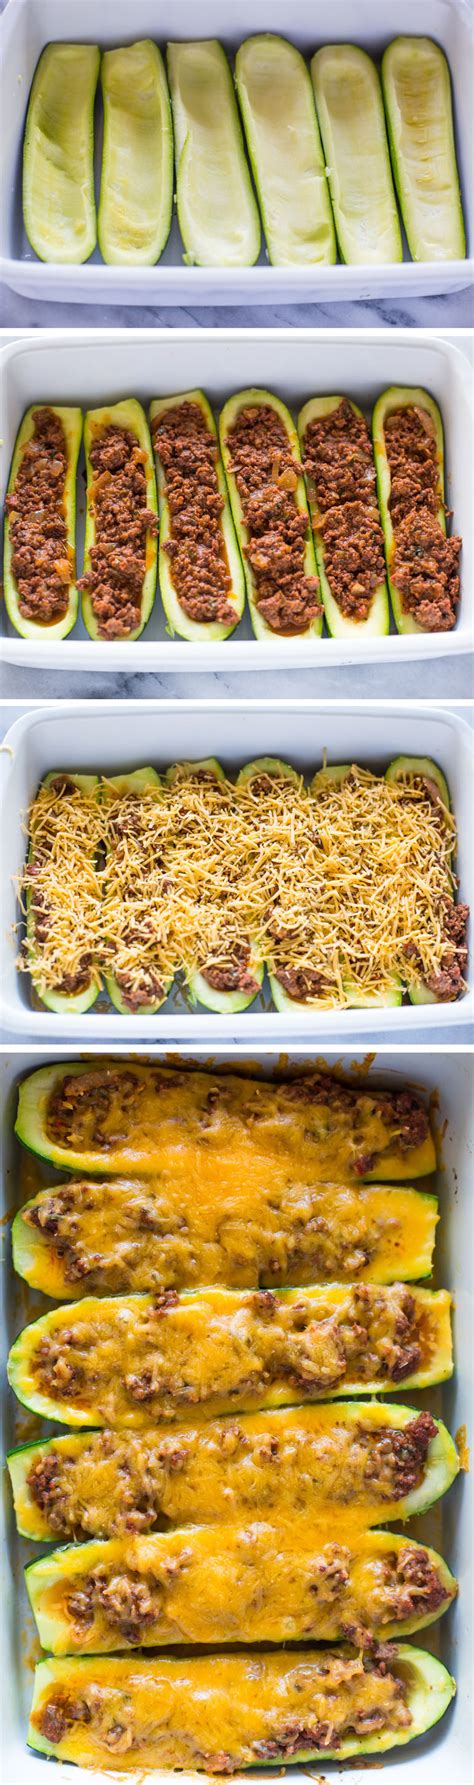 These stuffed zucchini boats make a fun and delicious vegetarian entrée, or could also be a side dish alongside grilled chicken or another meat entrée. Beef Stuffed Zucchini Boats | Gimme Delicious